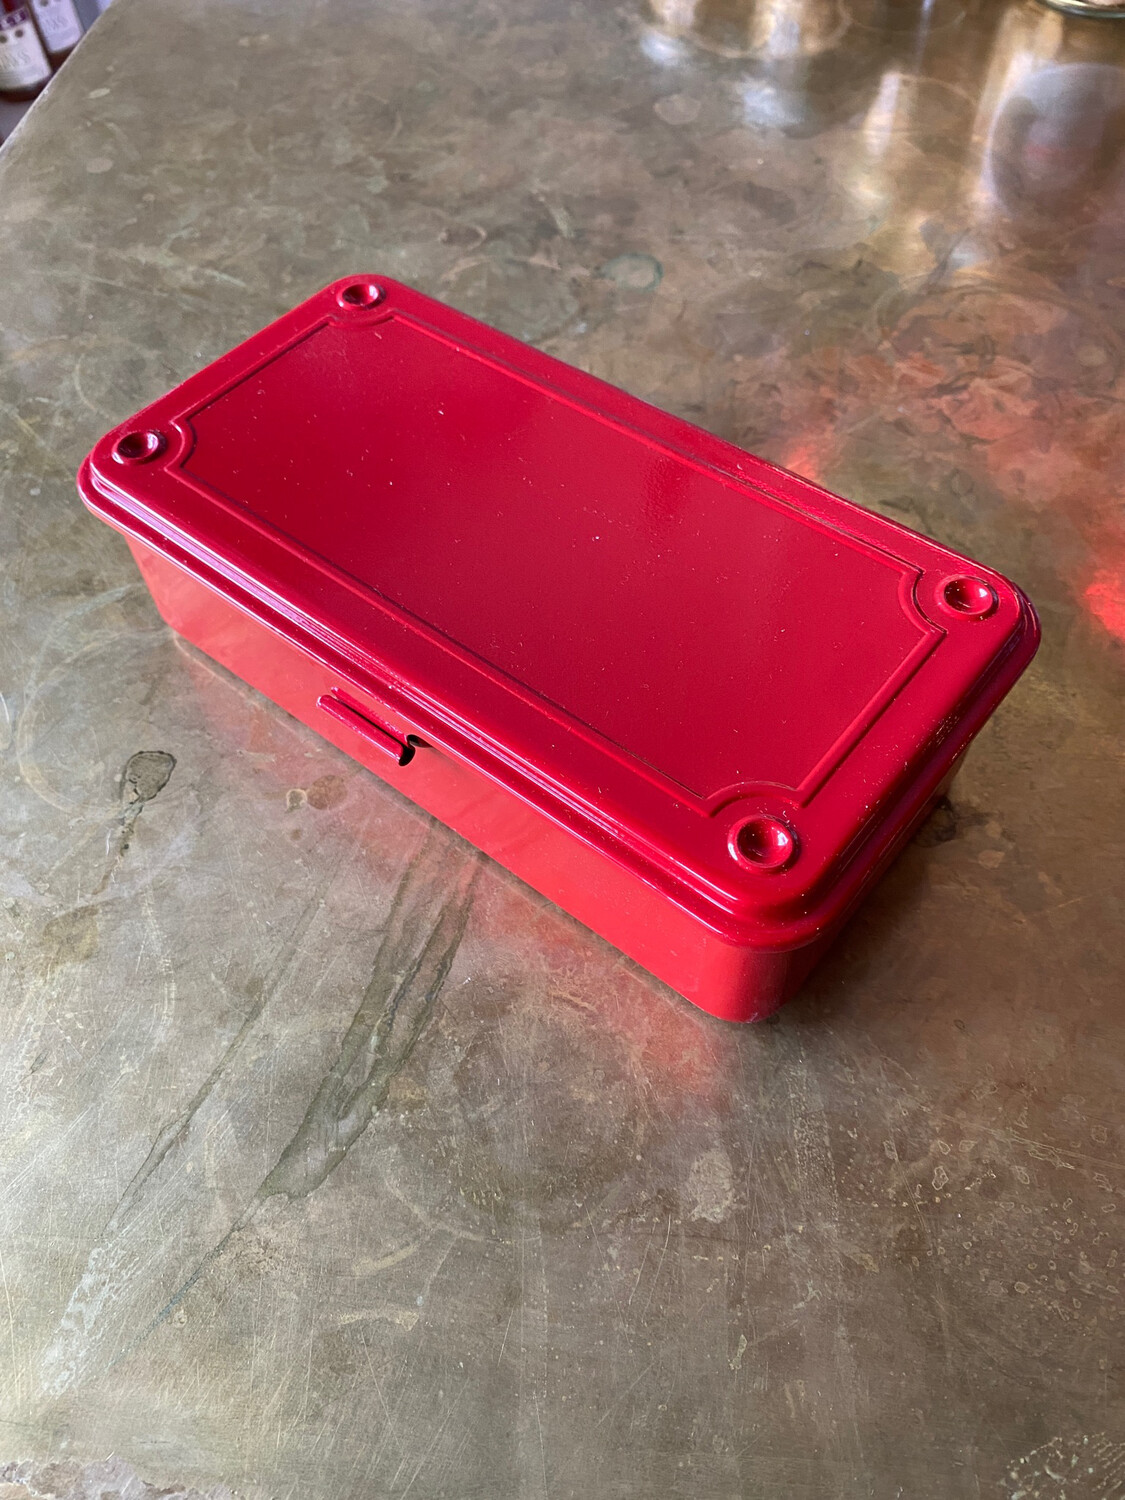 Toyo - Steel Stackable Storage Box T-190 - Red